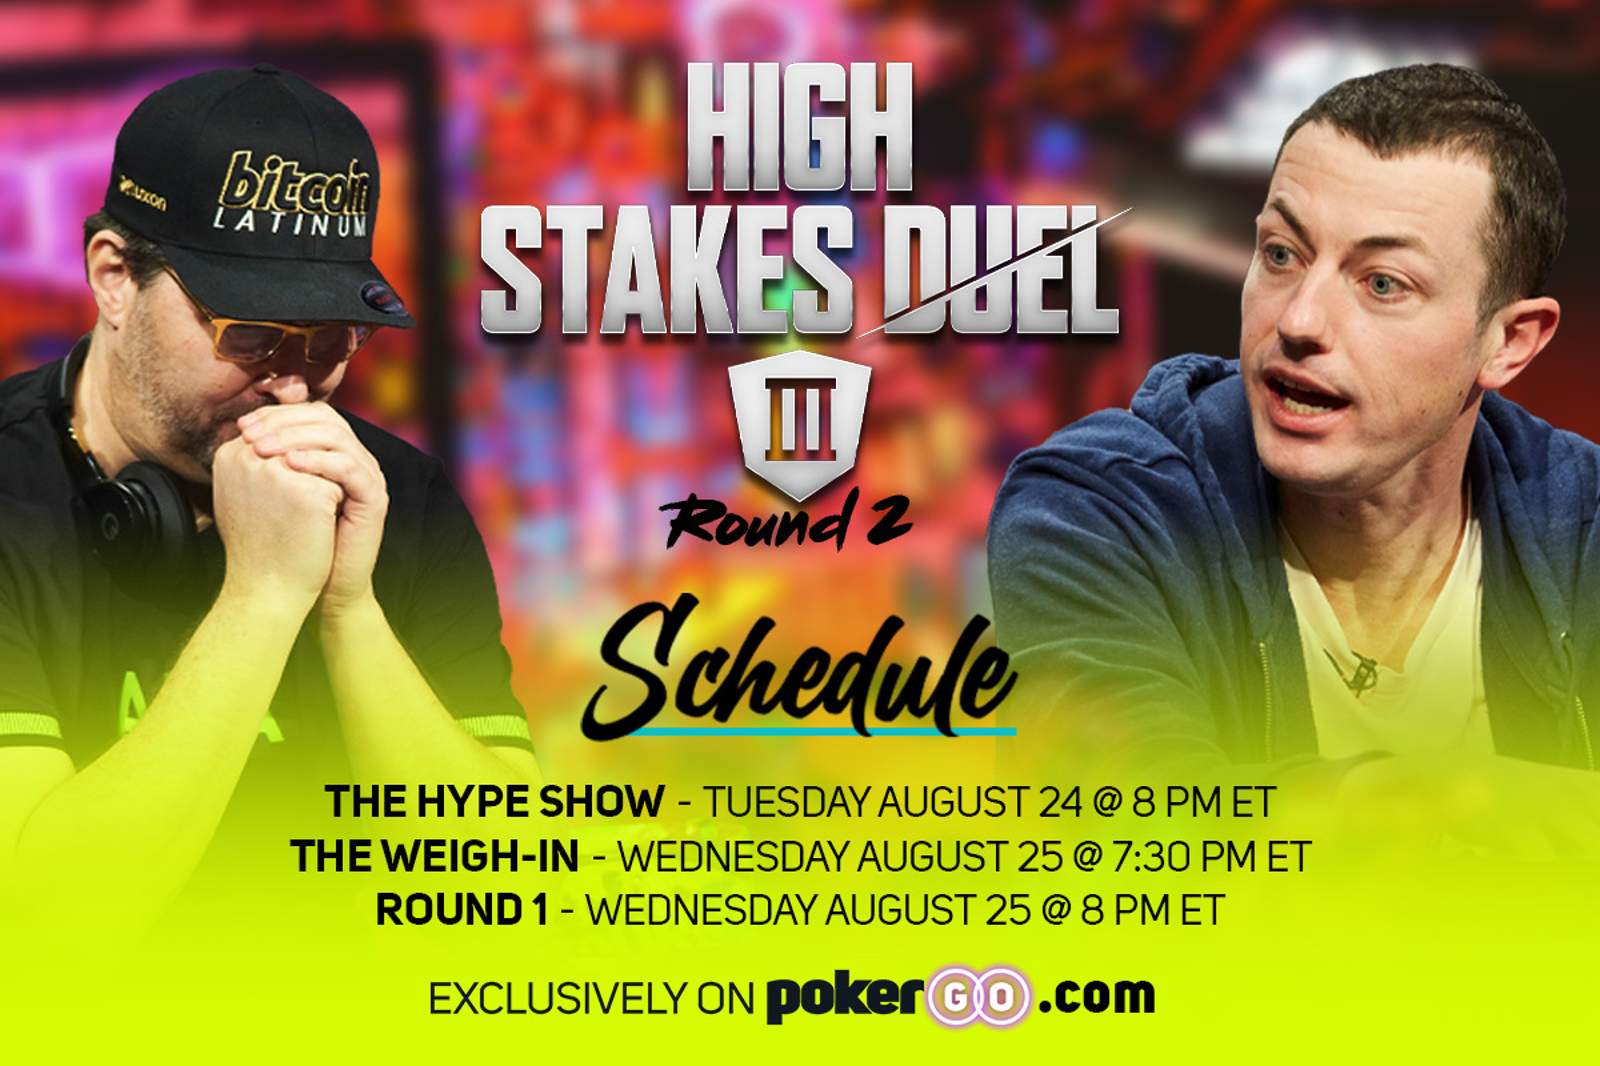 Round 2 of High Stakes Duel III Schedule - 3 Different Shows Over 2 Nights